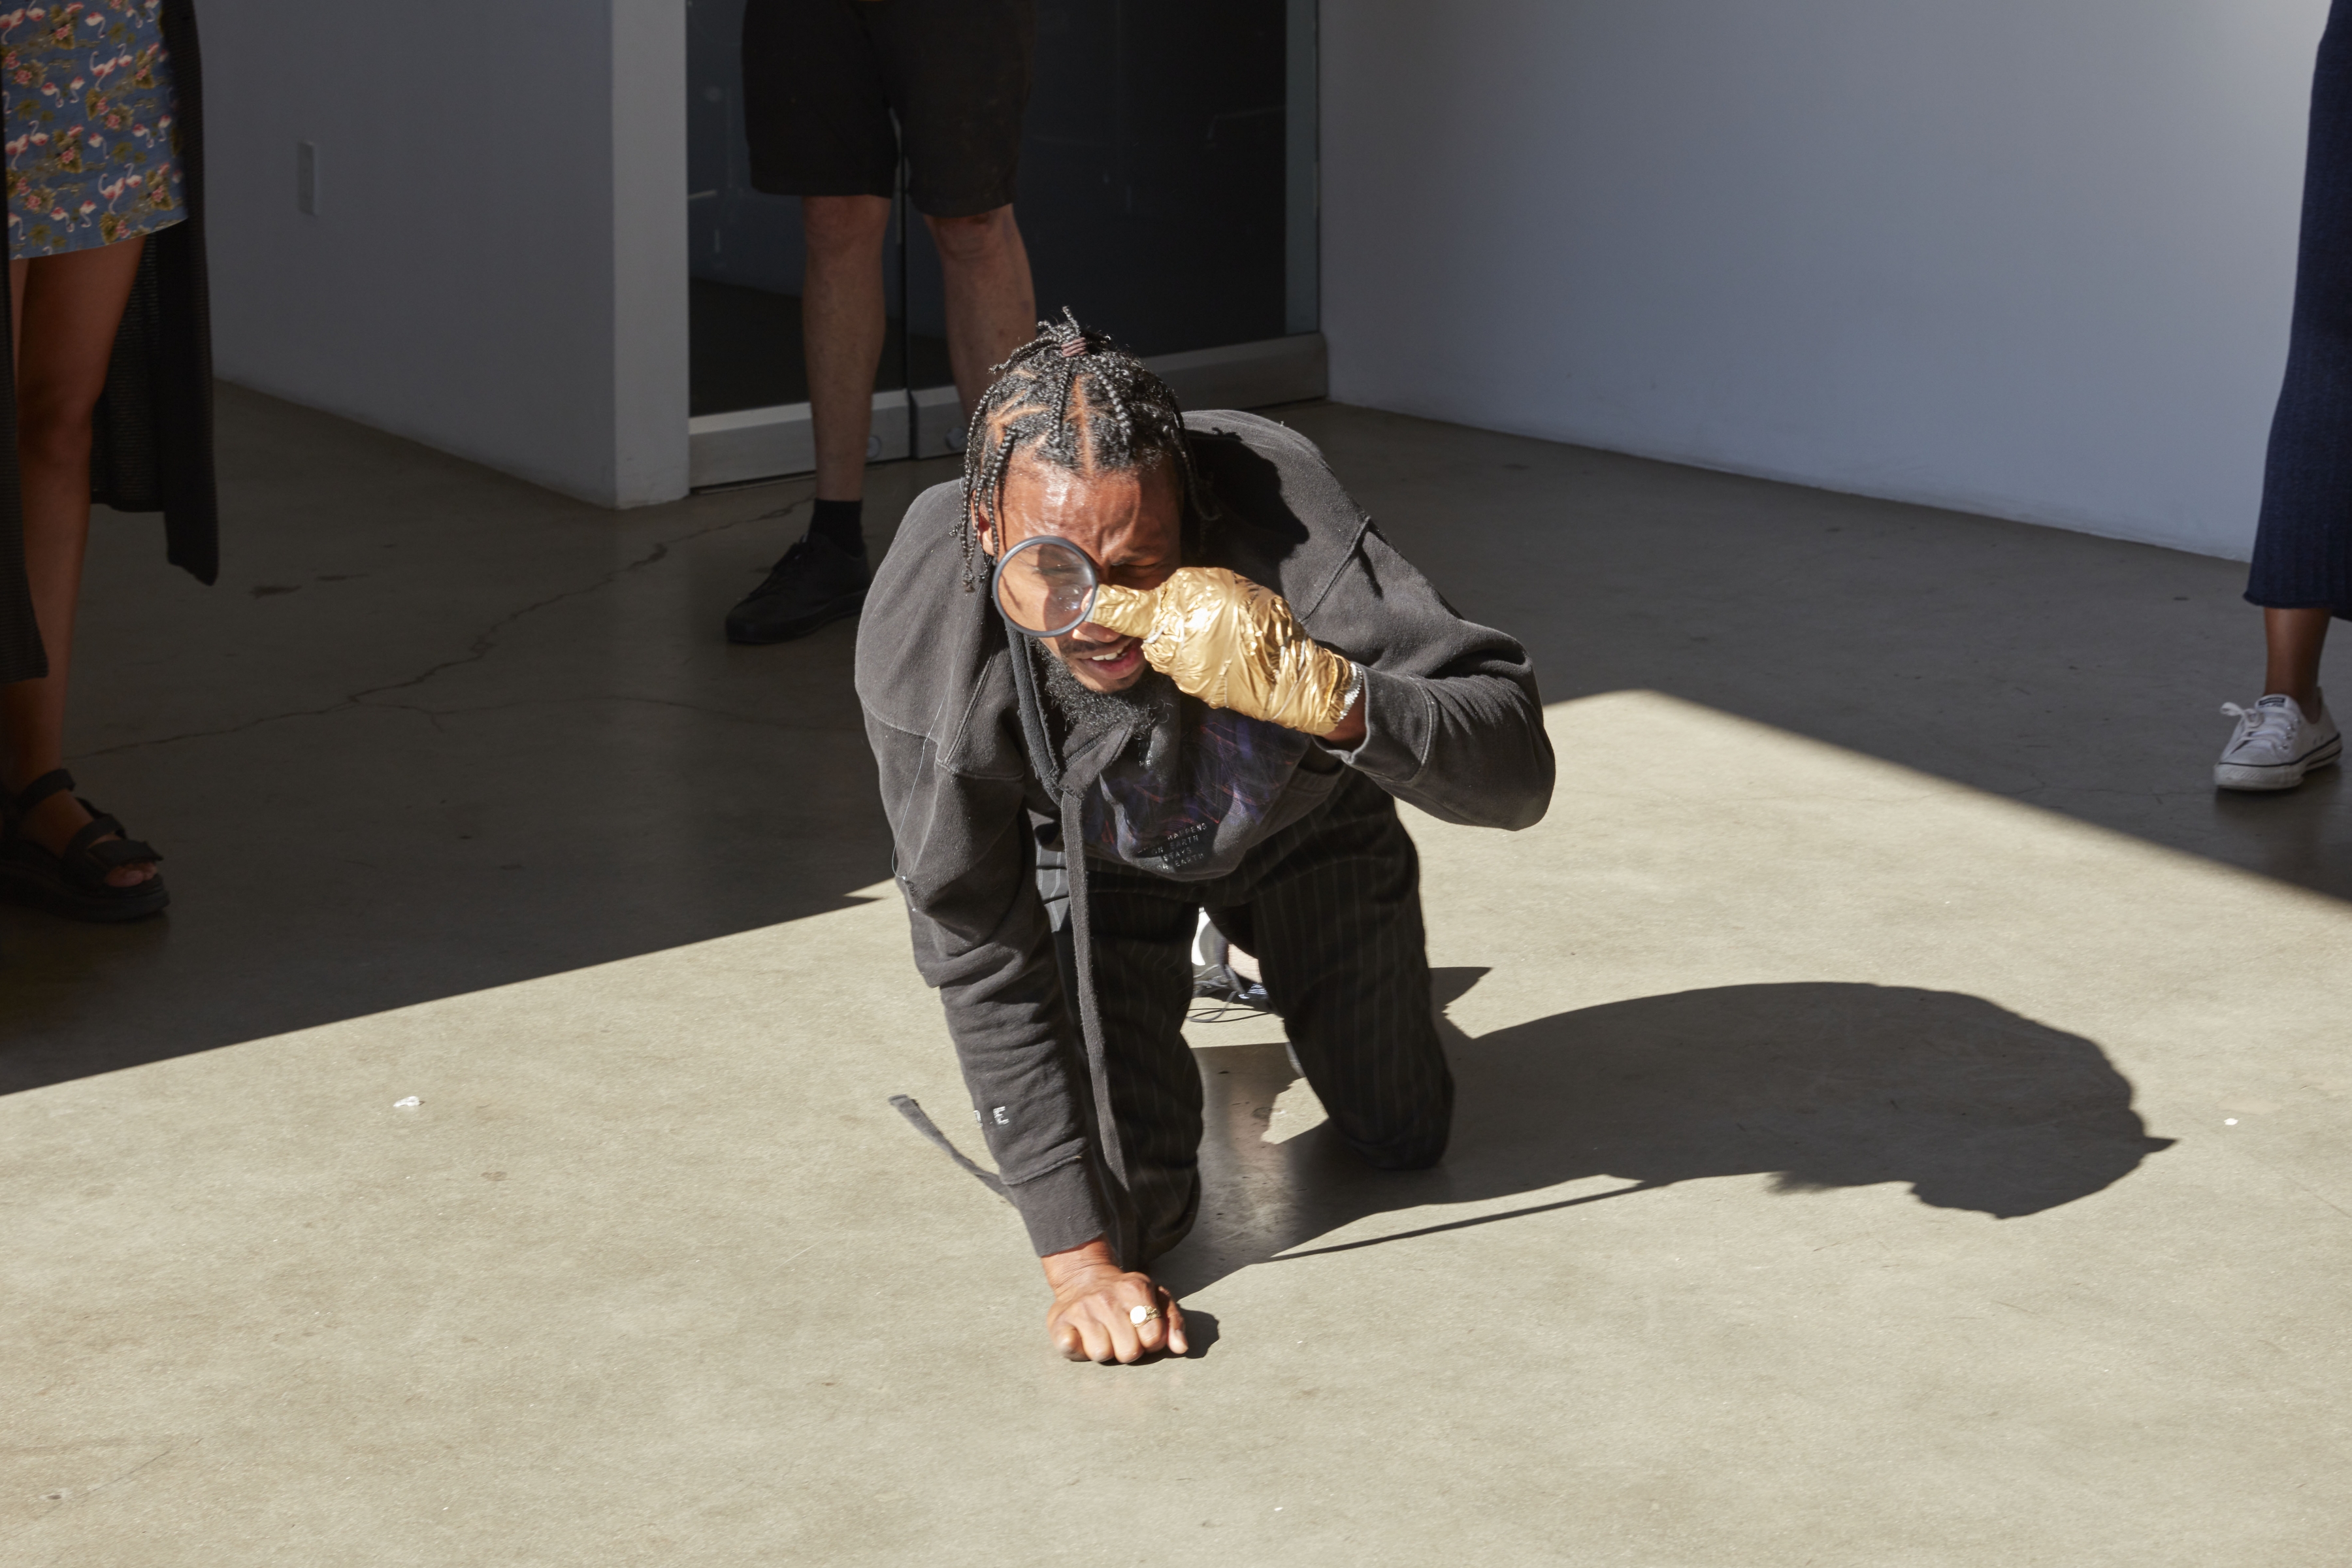 Daniel T. Gaitor-Lomack, Where the Hood At: A Conceptual Performance Assemblage, Performance documentation 